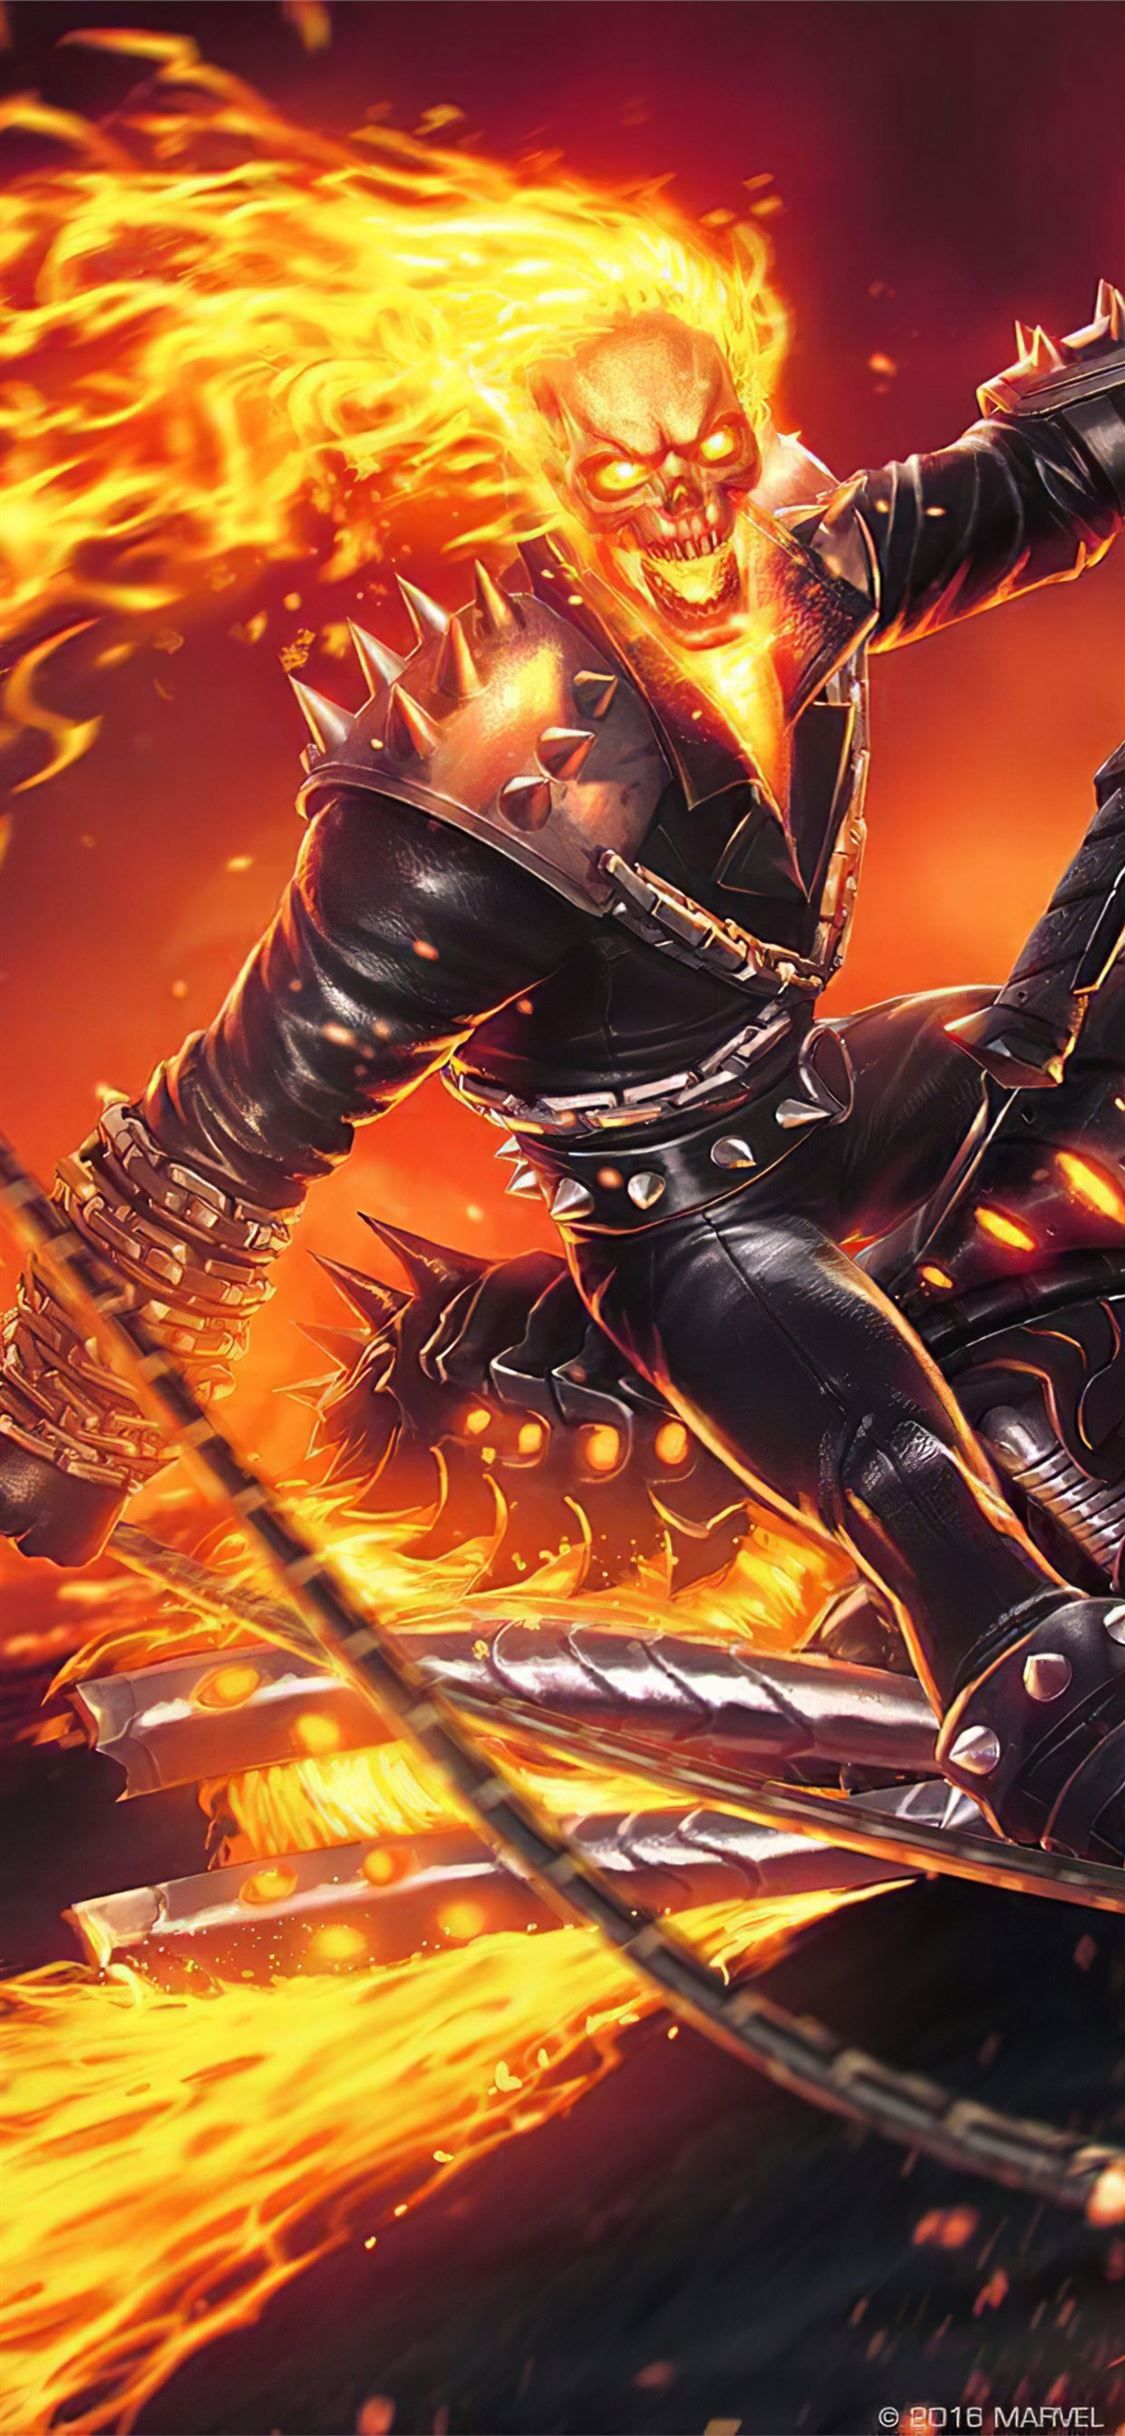 4k ghost rider contest of champions #MarvelContestOfChampions #GhostRider #Superheroes #games #ma. Ghost rider wallpaper, Ghost rider picture, Ghost rider marvel